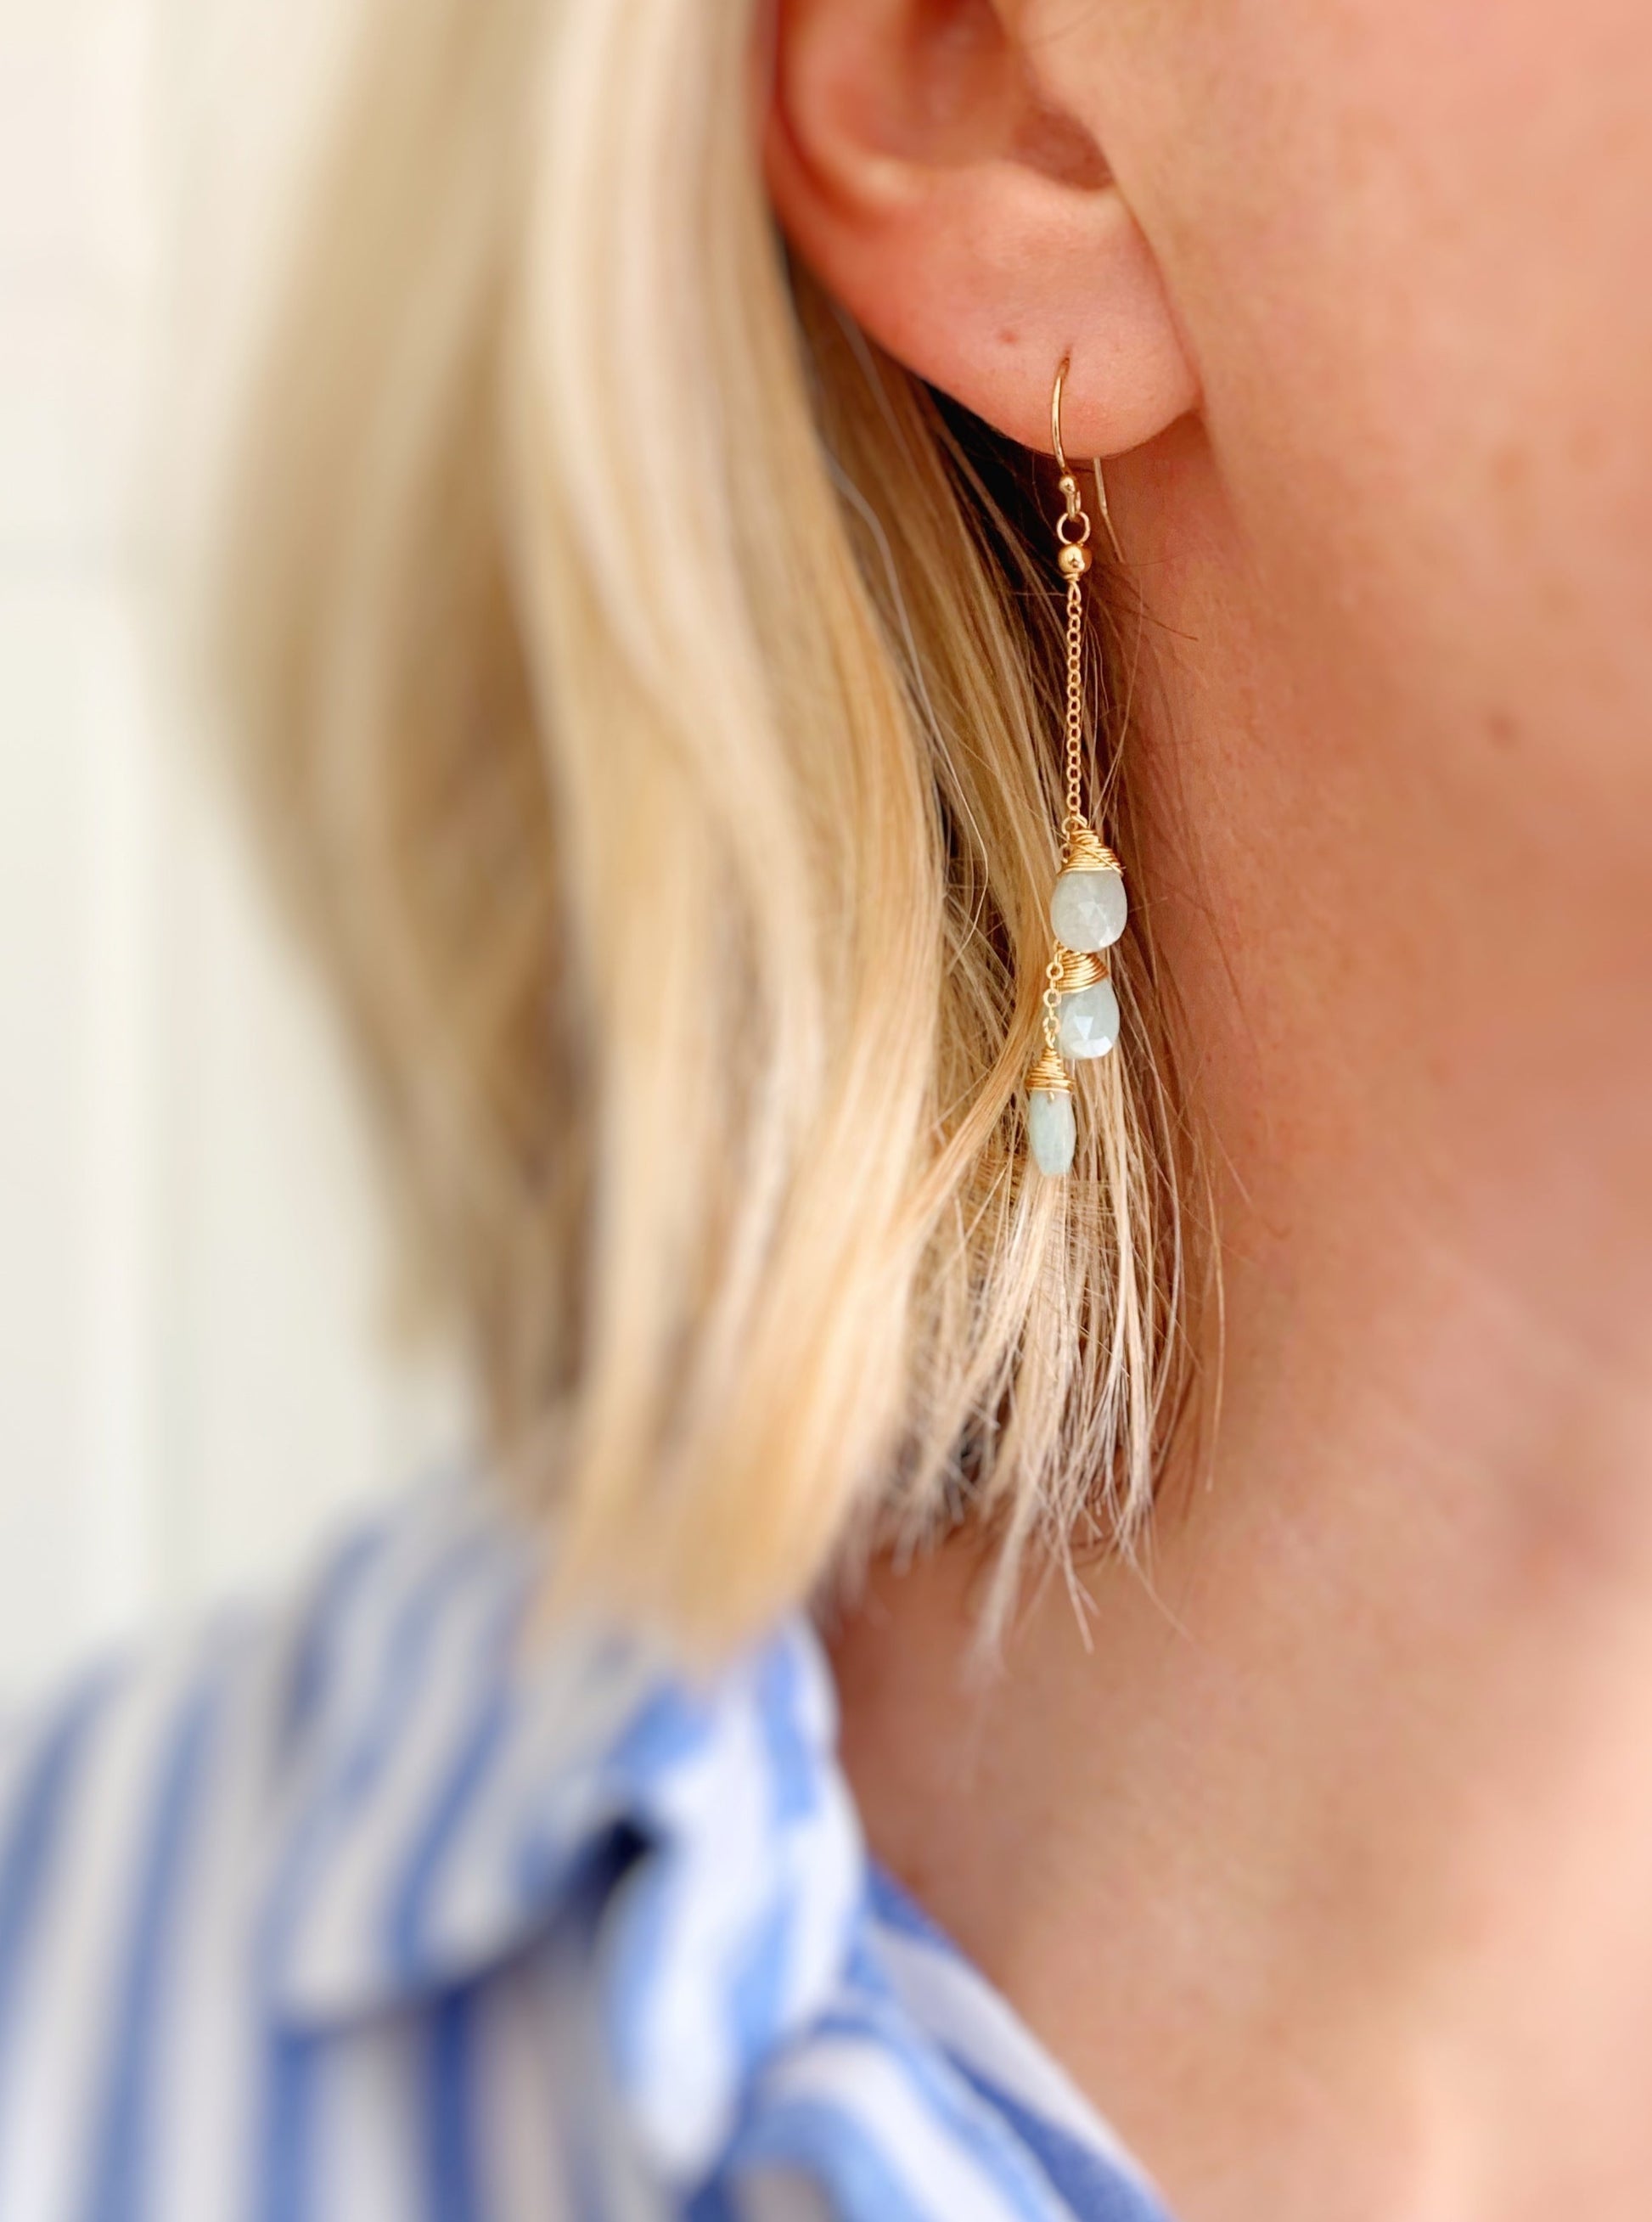 The raindrop earring is pictured here on a person's ear to show wearability